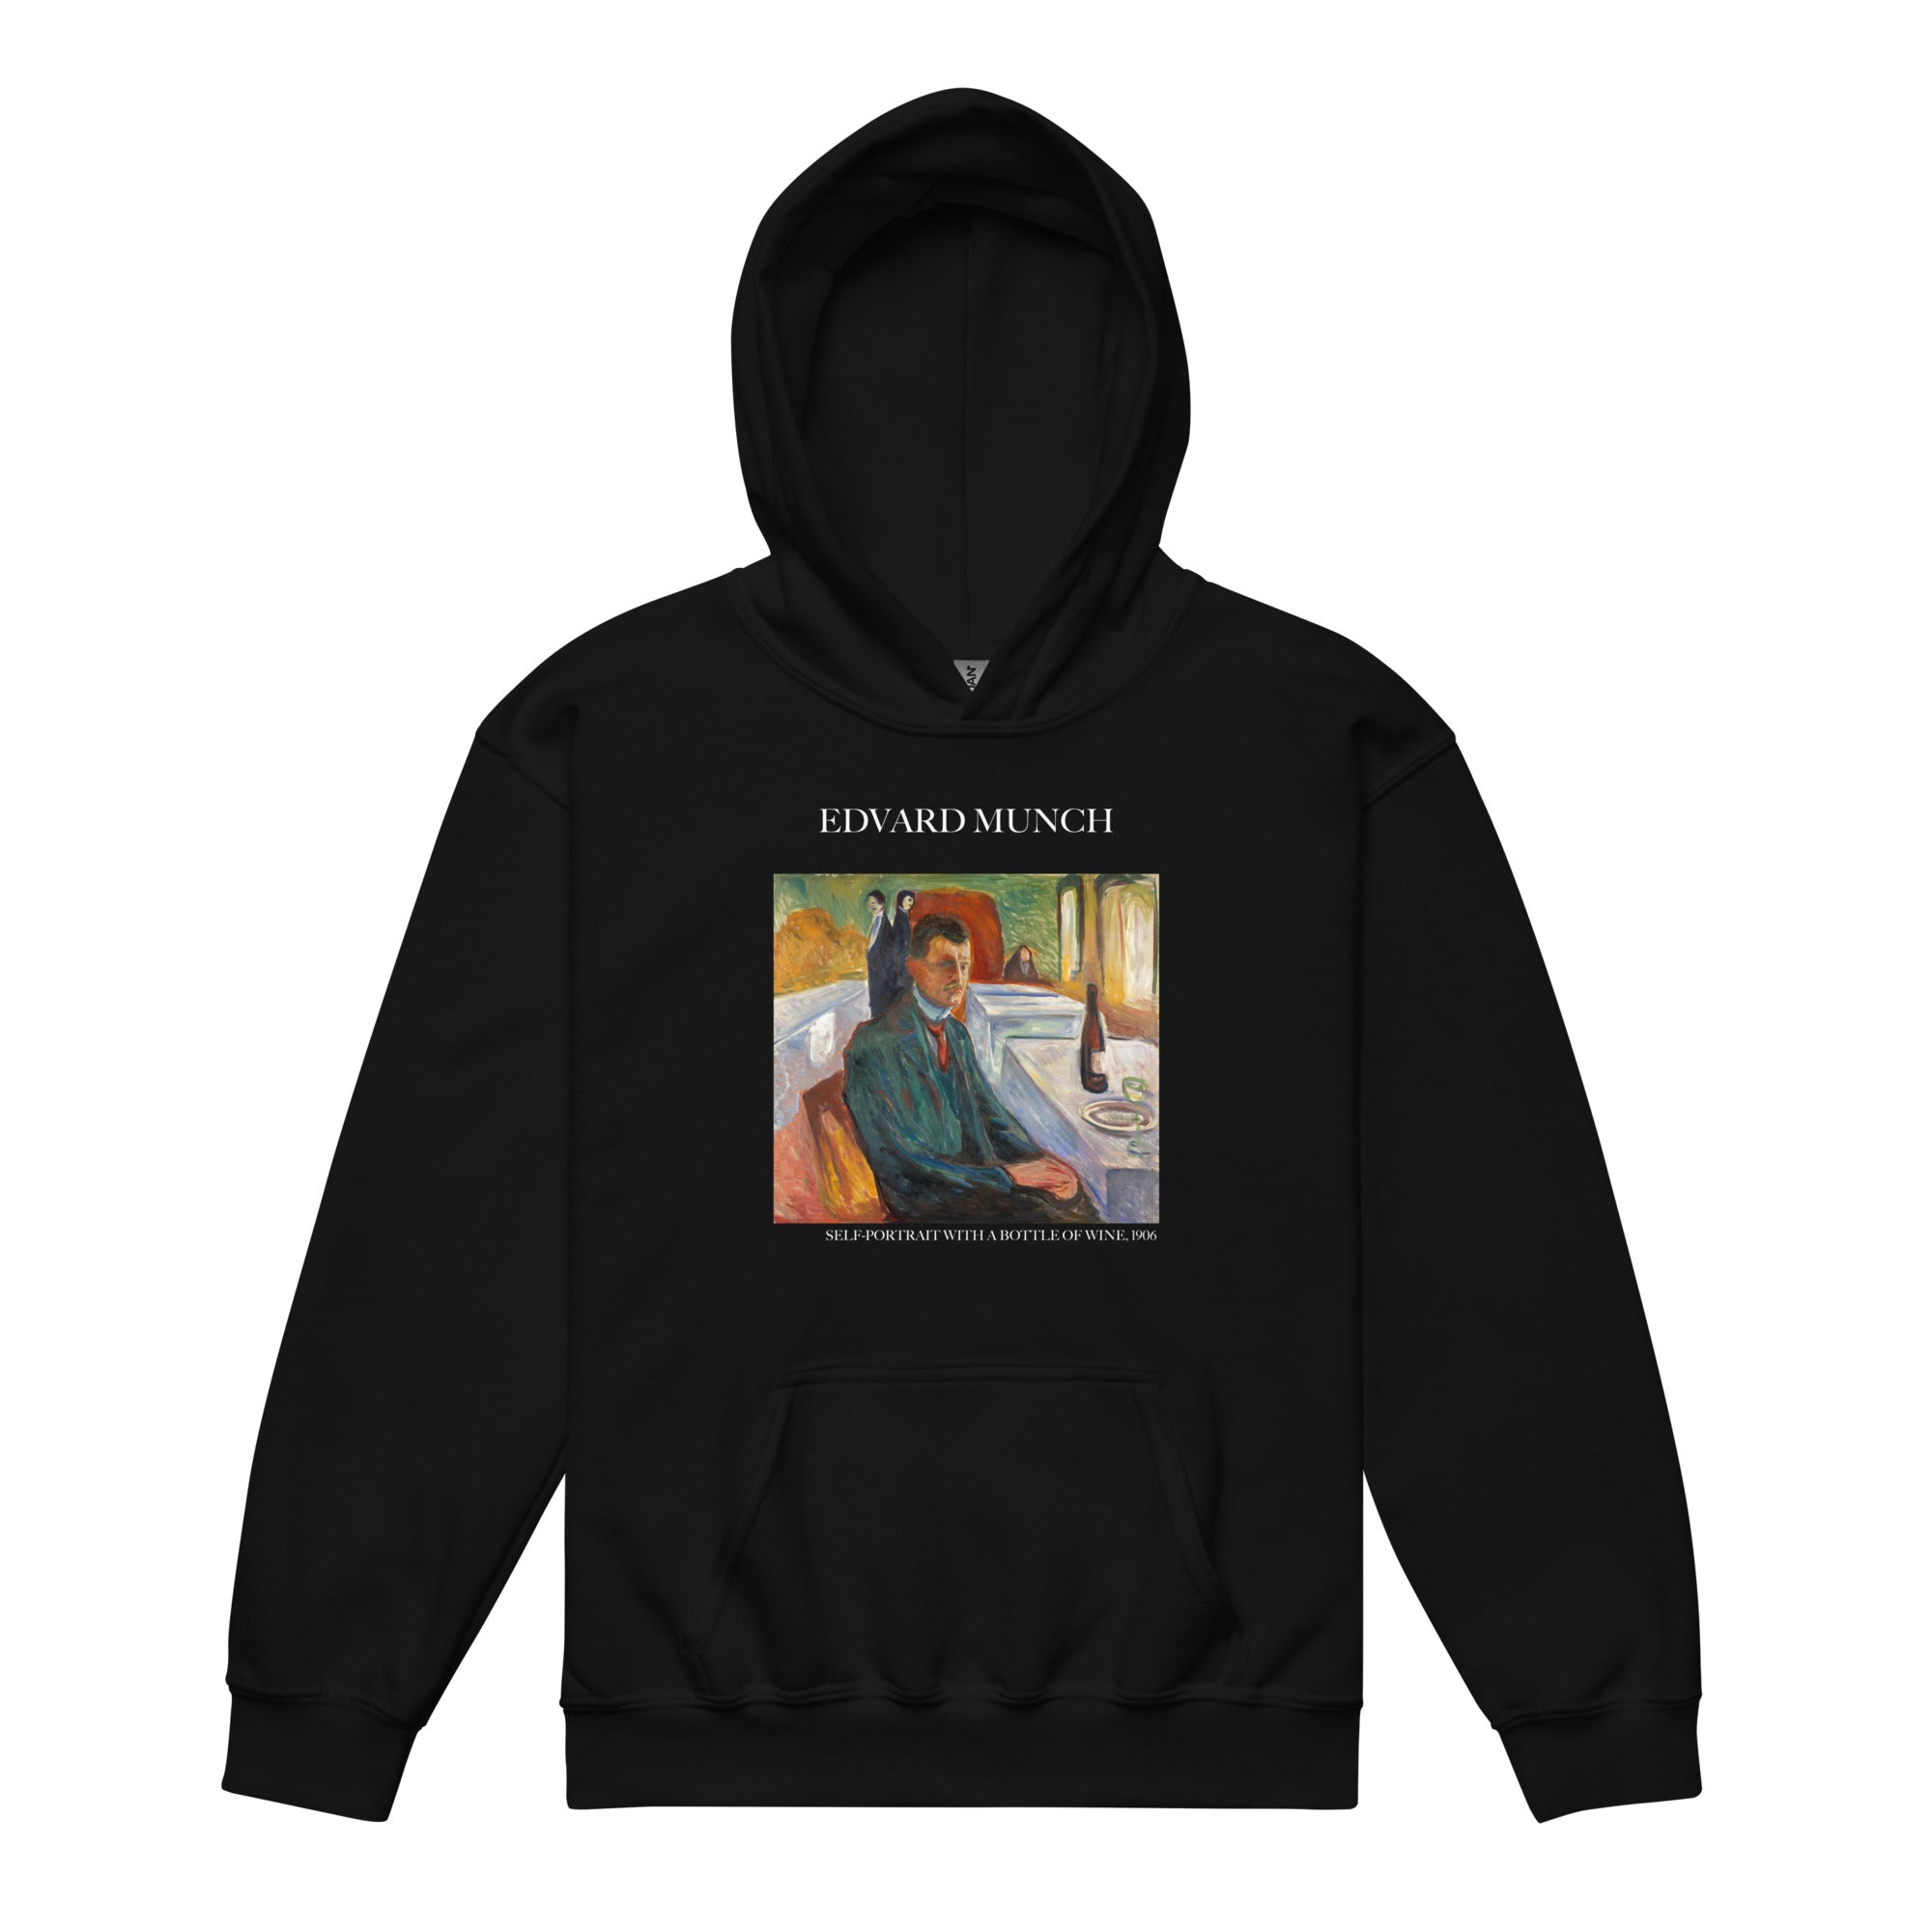 Edvard Munch 'Self-Portrait with a Bottle of Wine' Famous Painting Hoodie | Premium Youth Art Hoodie